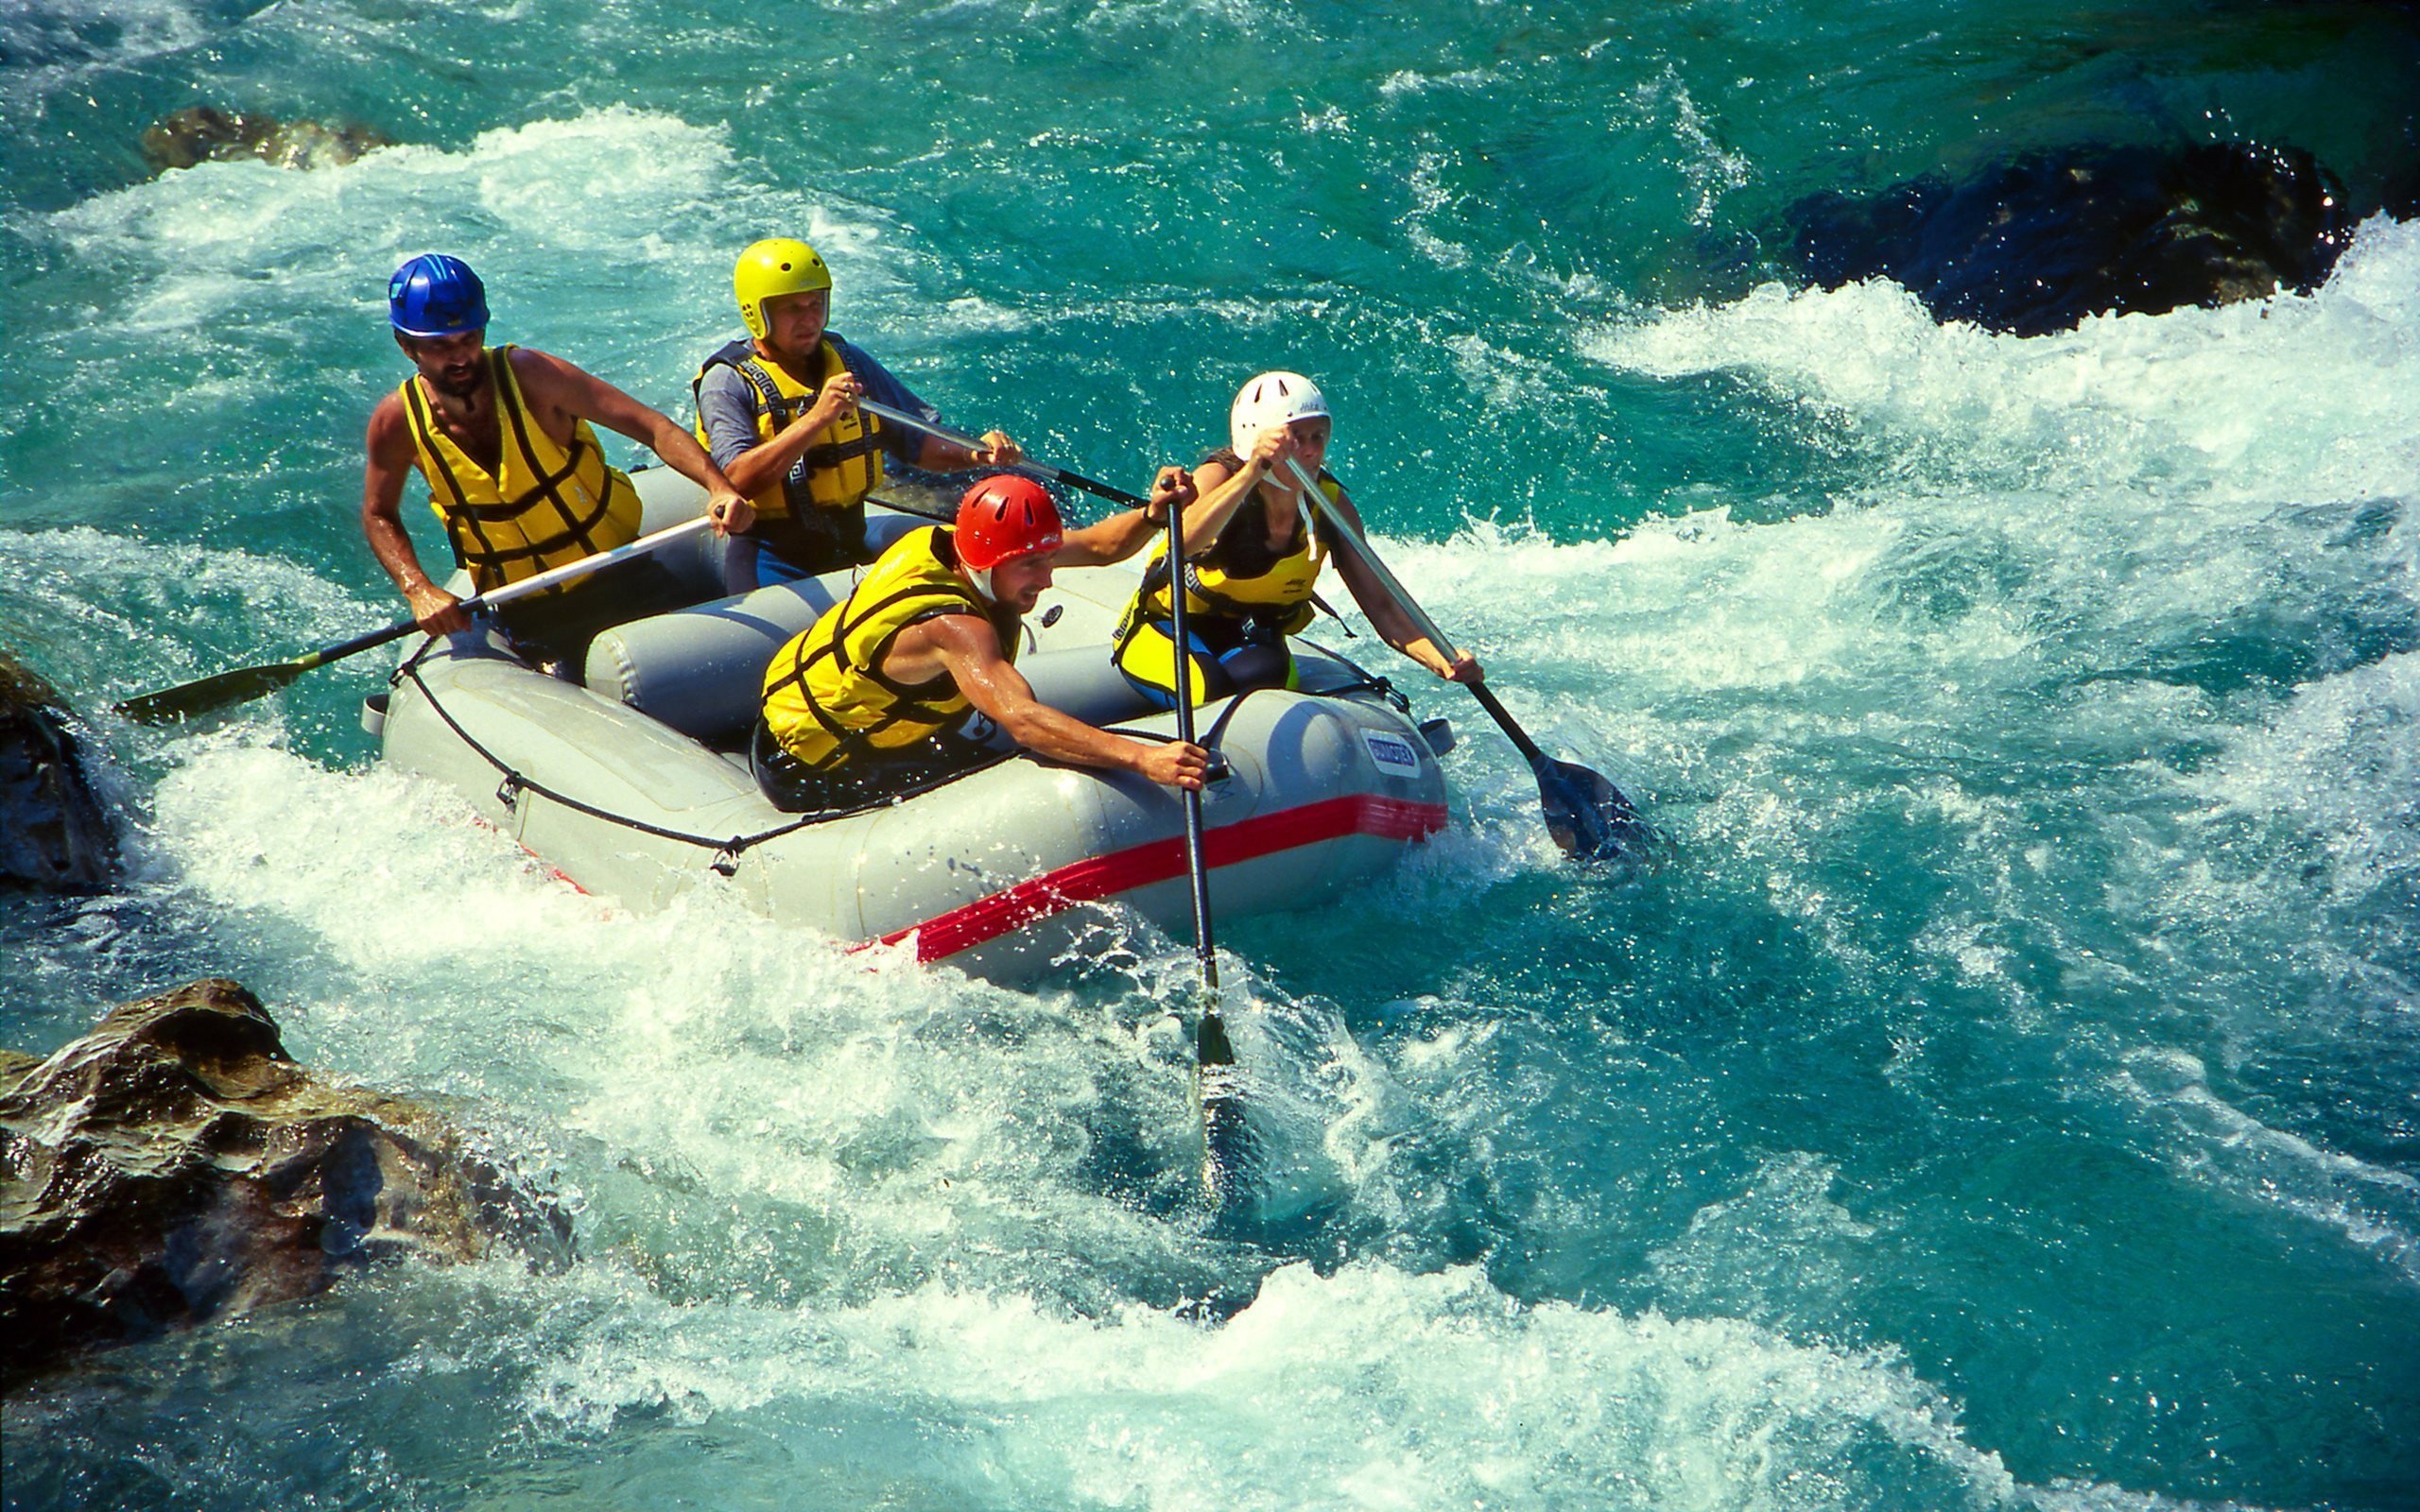 Rafting: Active maneuvering skills performed by professionals, Class 4 whitewater difficulty. 2560x1600 HD Wallpaper.